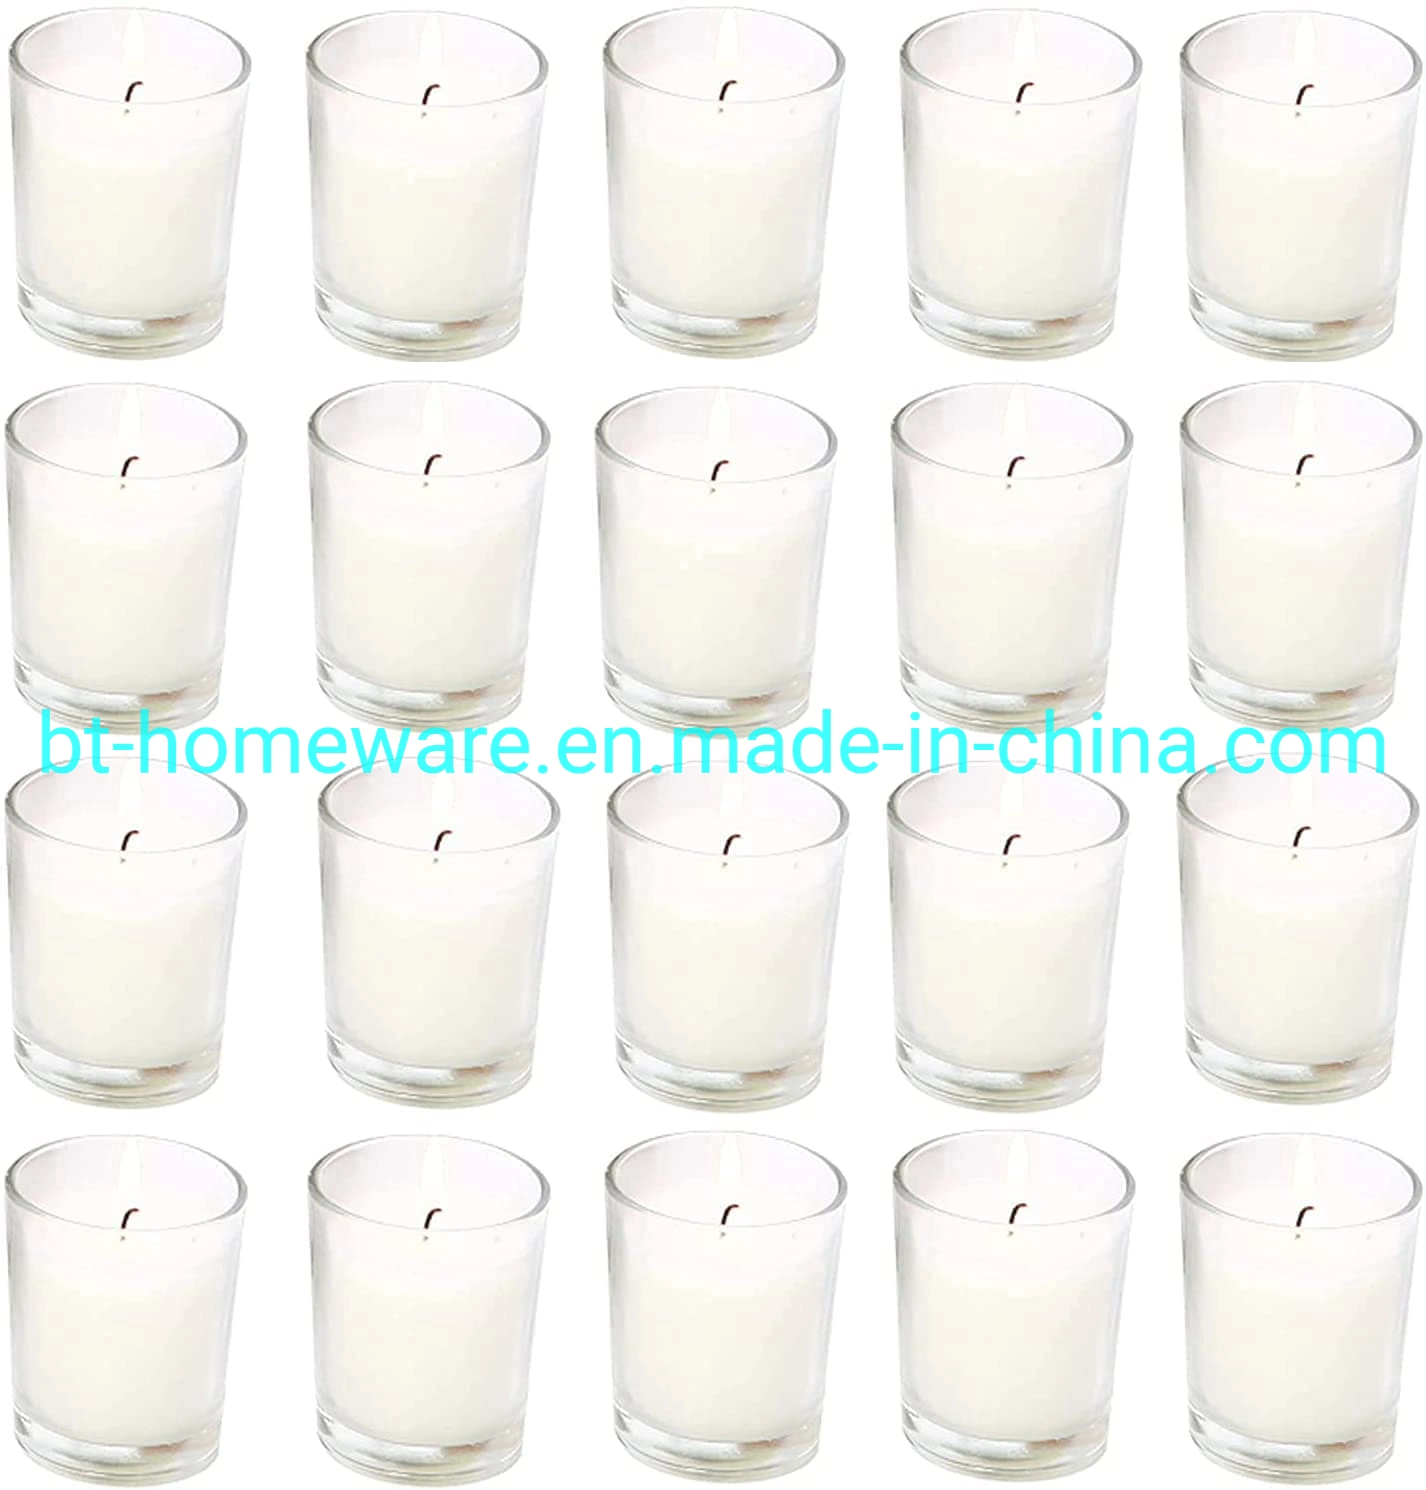 Wholesale 82ml 2.5oz Transparent Wishing Candle Glass Jar Cup Is Ideal for Home Decor SPA Wedding Birthday Parties